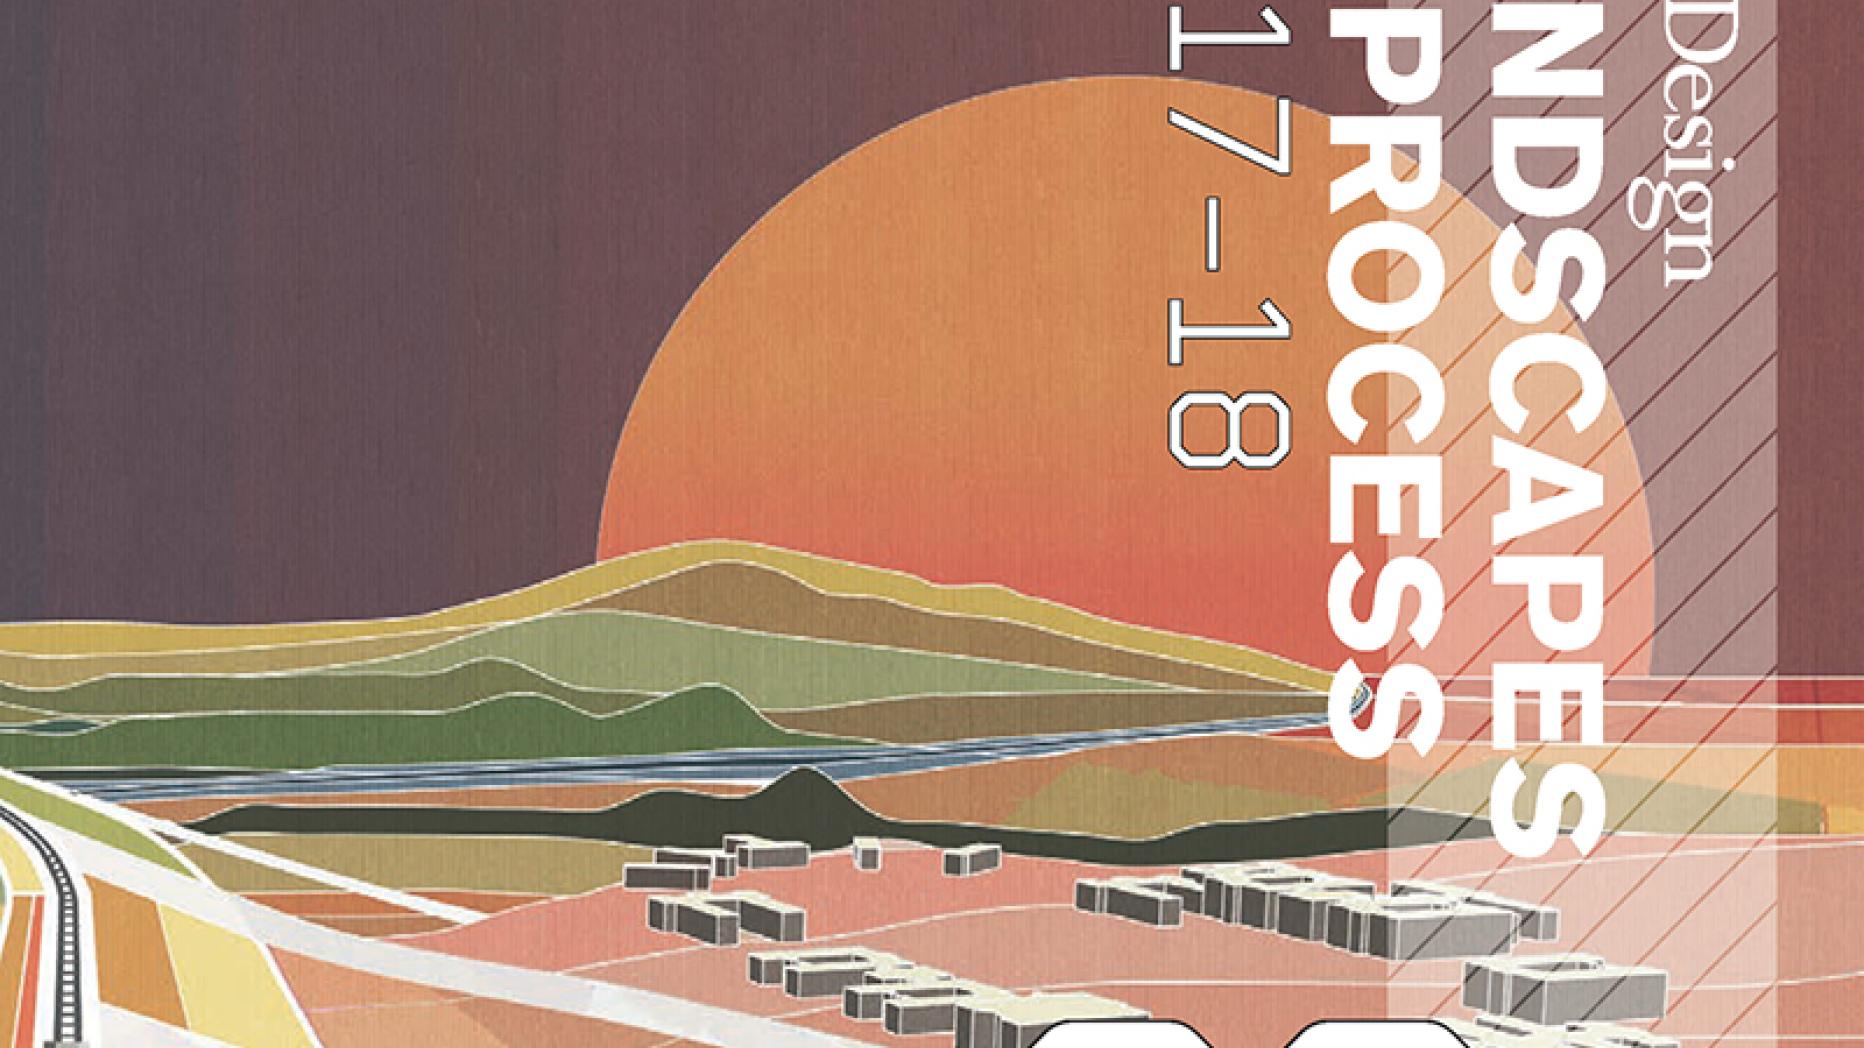 Cover for publication, "Landscapes in Process" edition 22, 2017-18